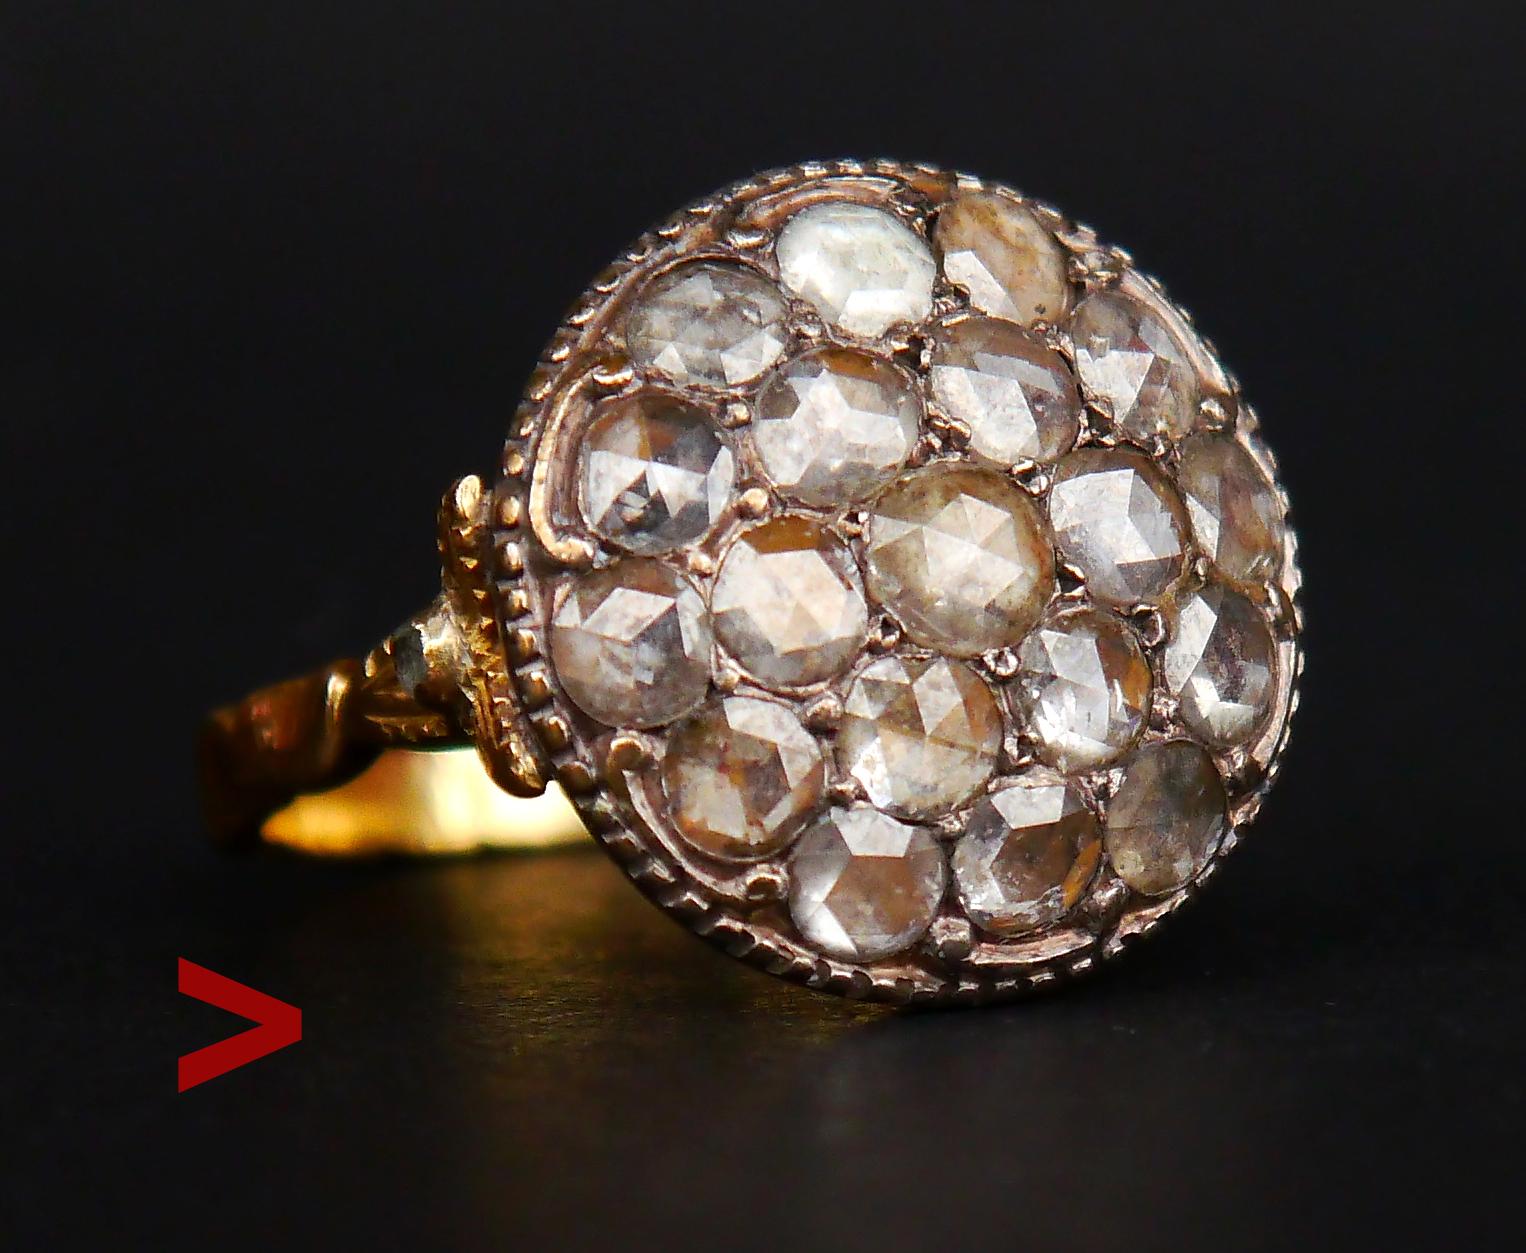 Old 18th - 19th cent. sparkling beauty with dome of the crown in Silver on 18K Yellow Gold holding 19 rose cut Diamonds. Largest stone in the center is Ø 4.5mm / 0. 4ct , 18 around it are Ø 4 mm / 0.25ct each . Total weight of the stones involved is